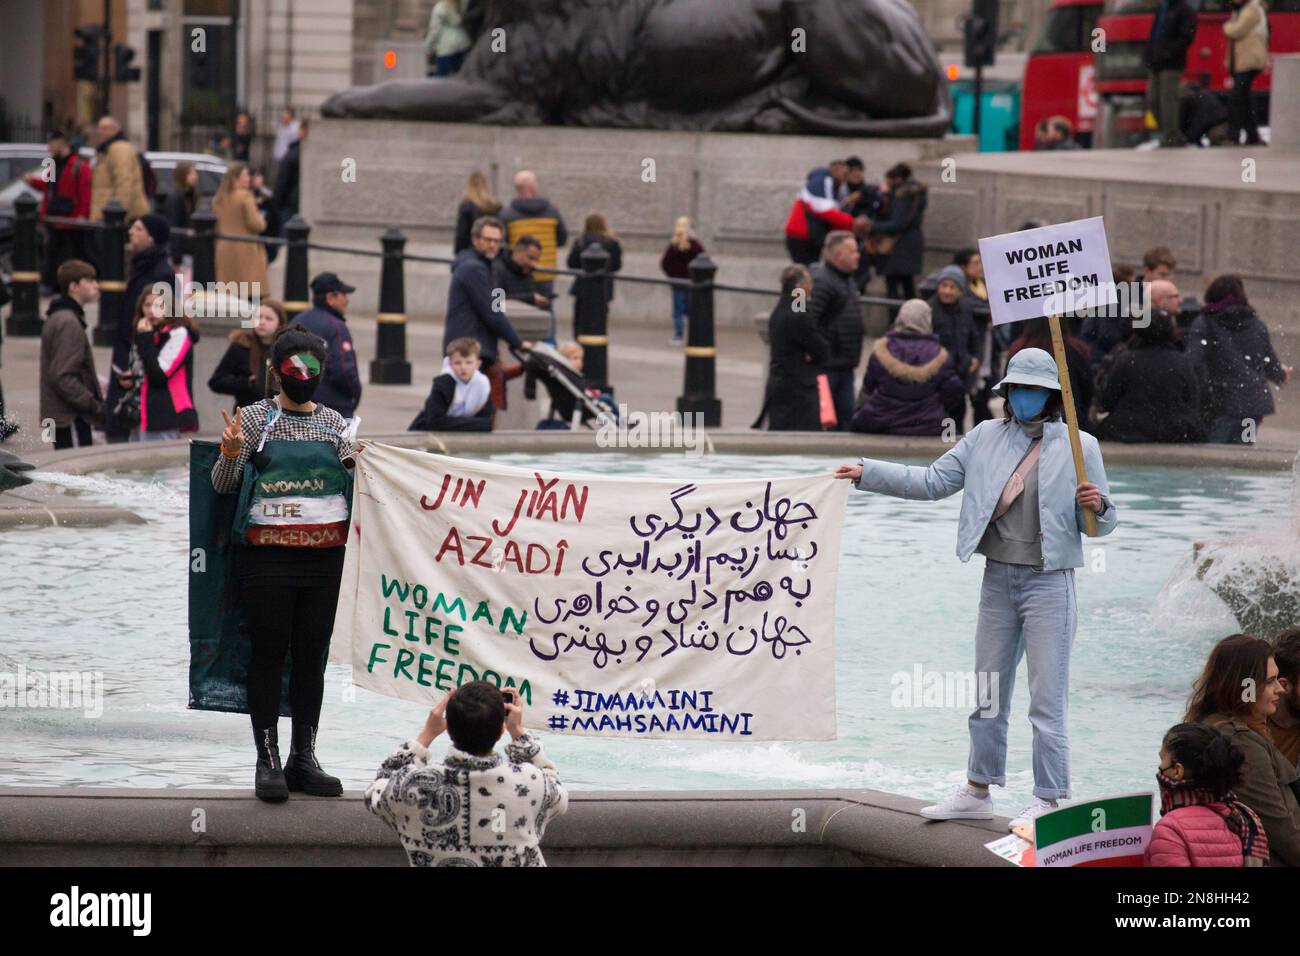 Iran Woman Life Freedom Protest Trafalgar Square Londres Banque D'Images